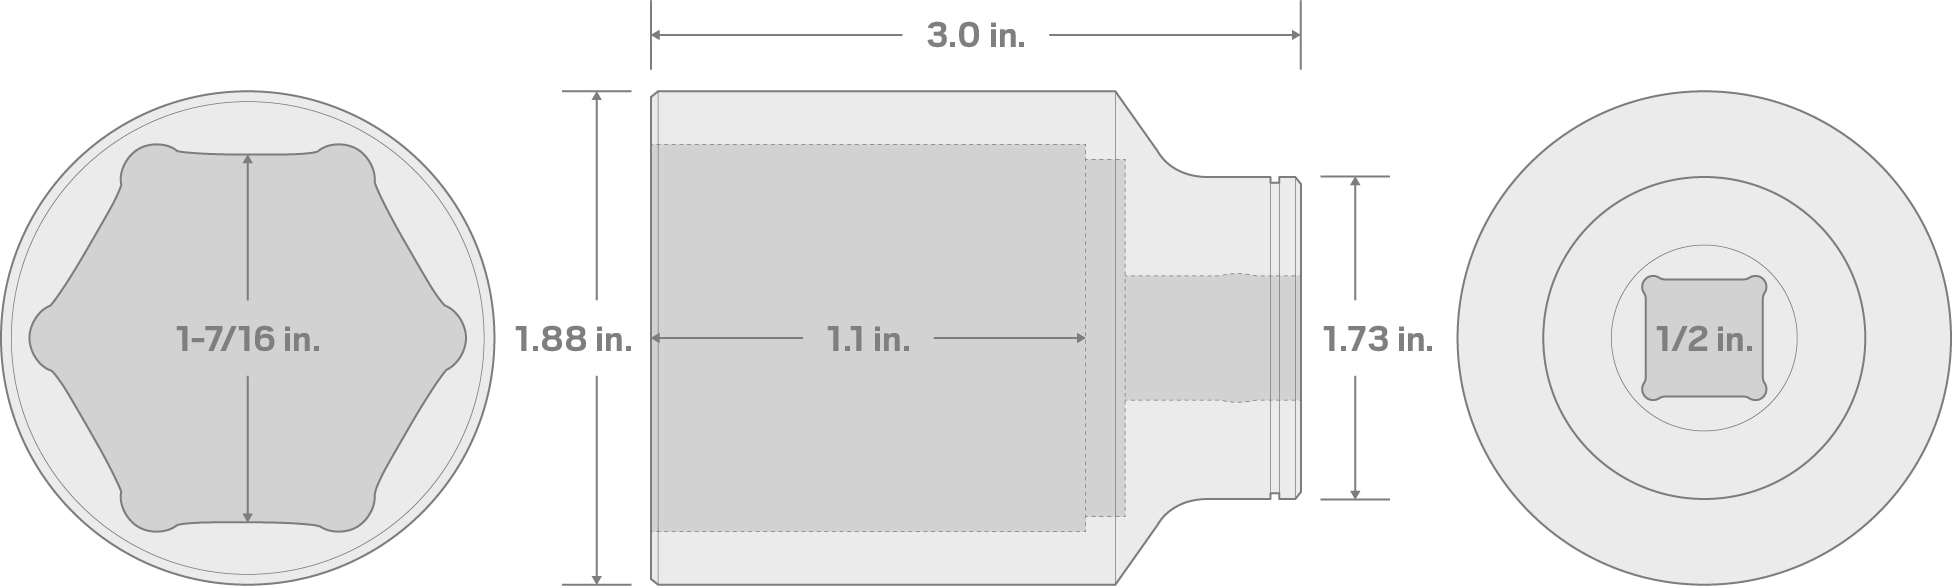 Specs for 1/2 Inch Drive x 1-7/16 Inch Deep 6-Point Socket